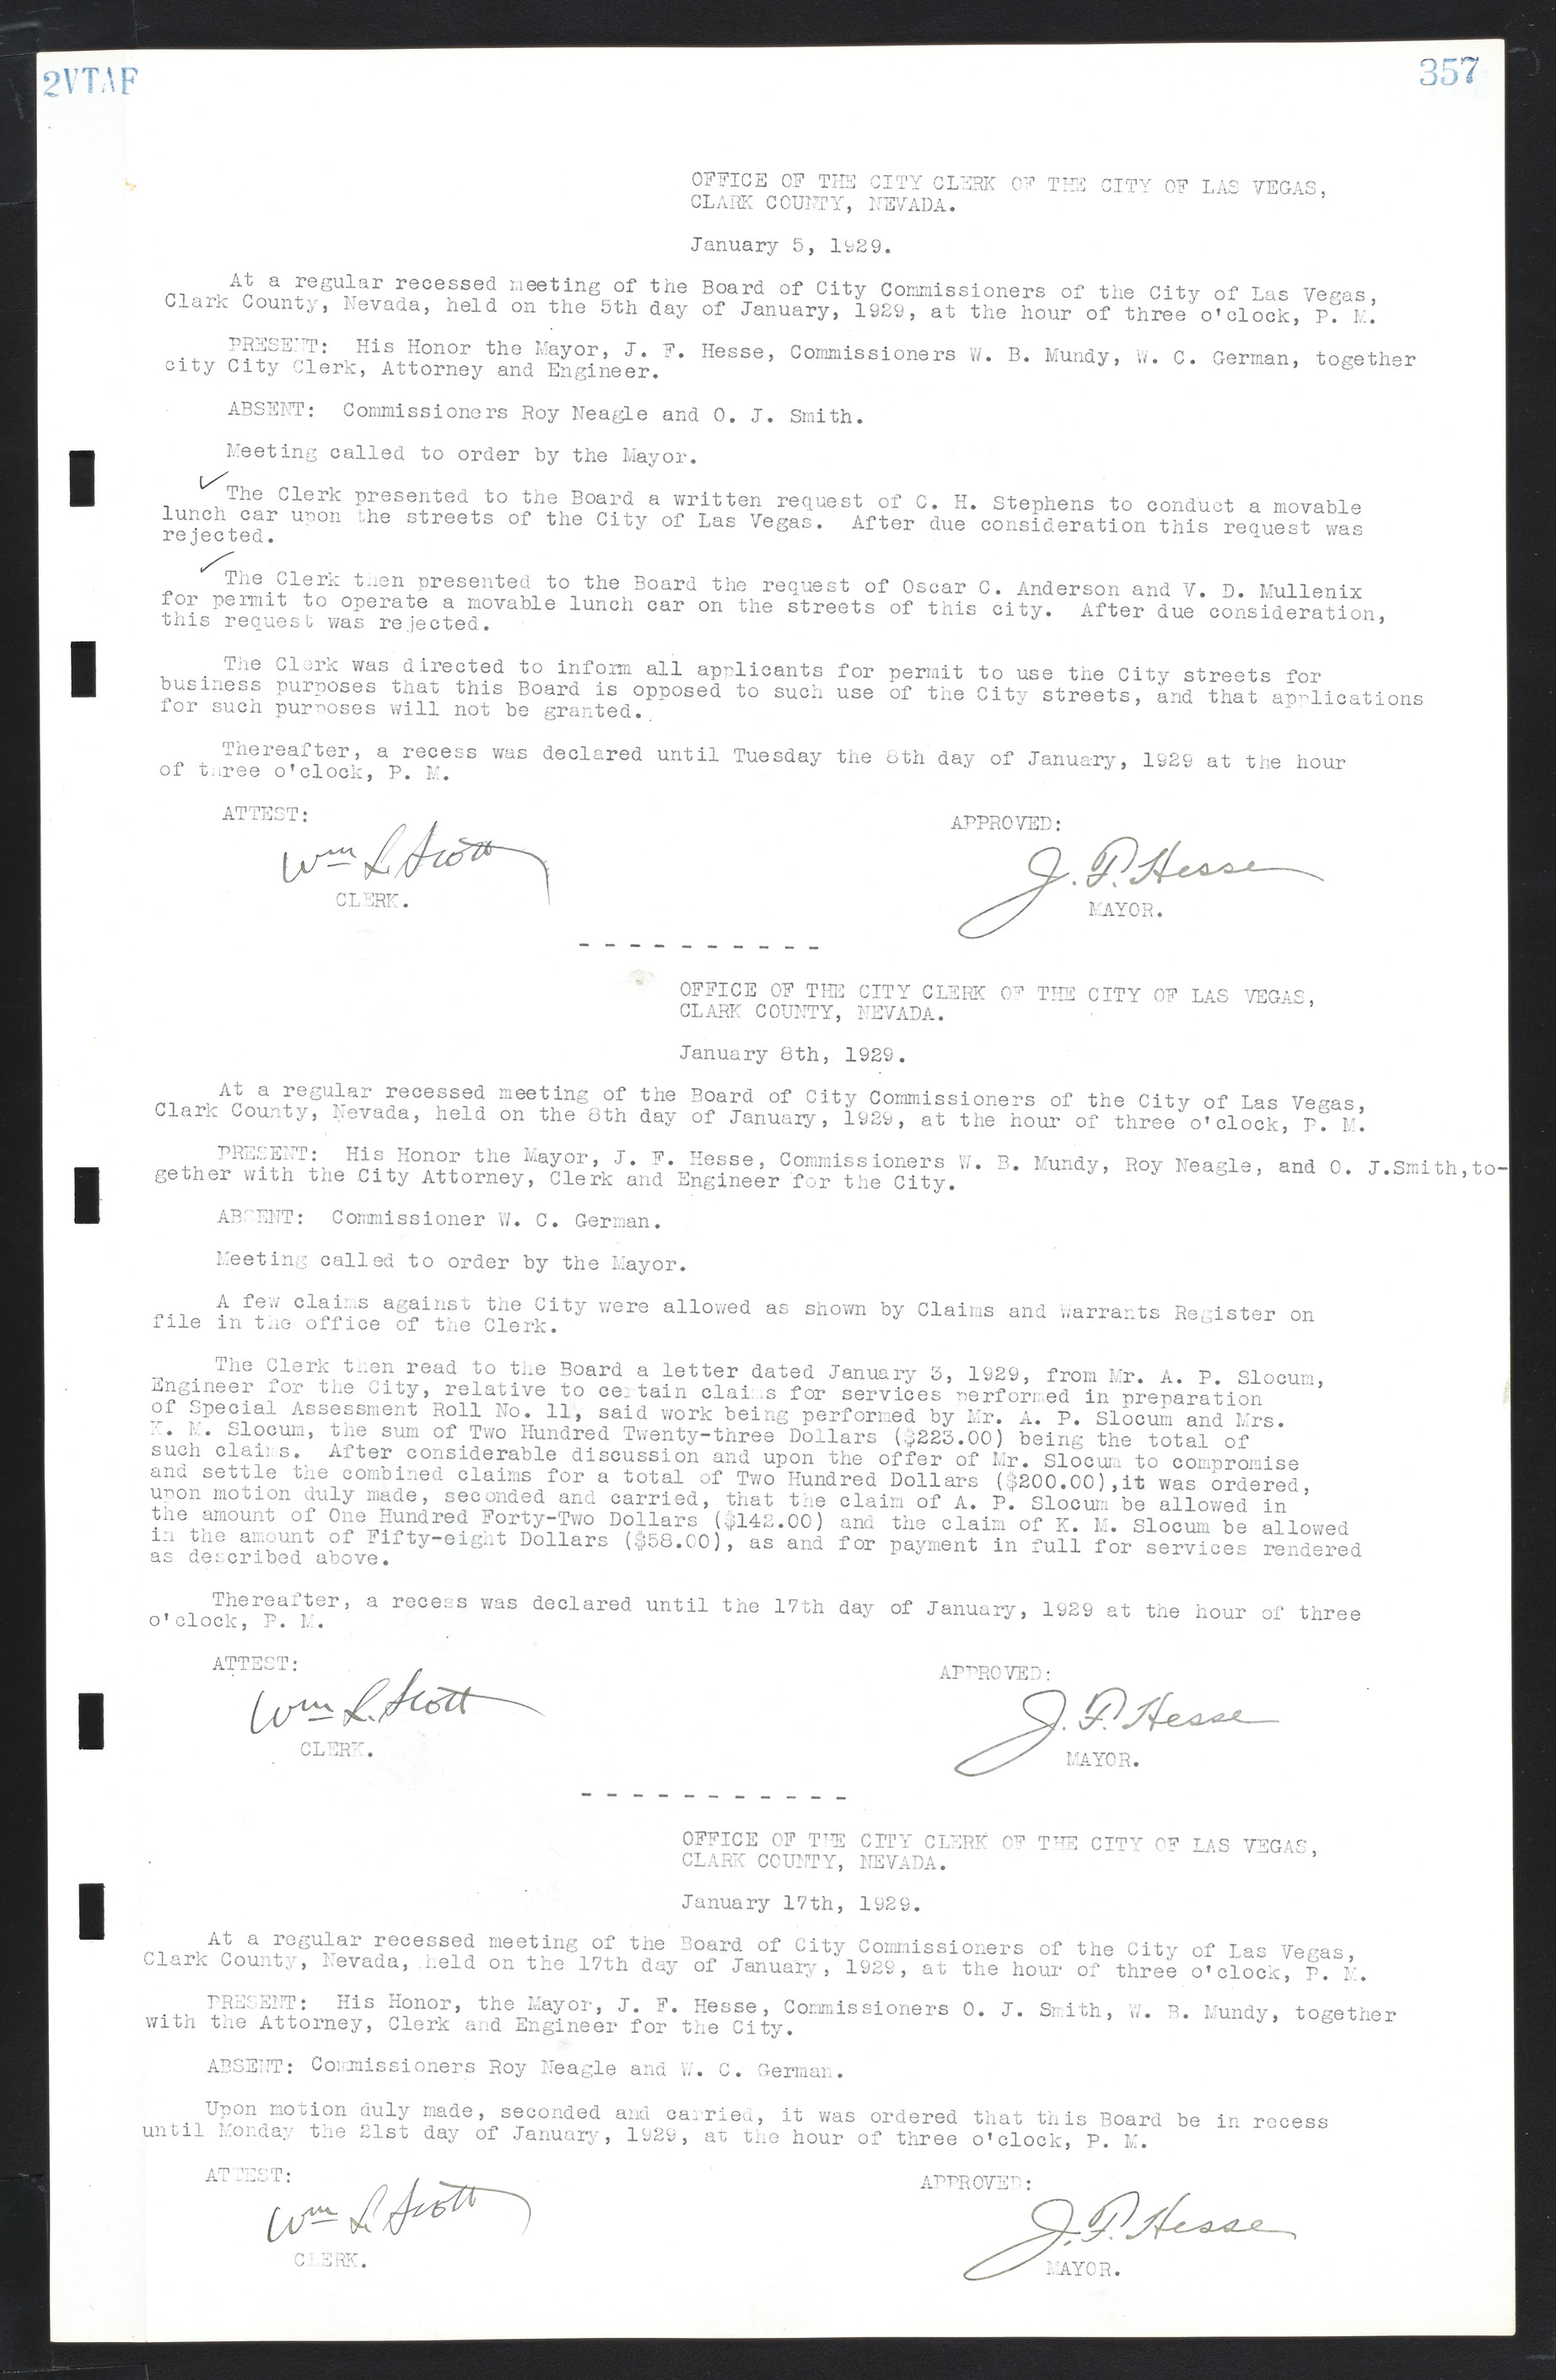 Las Vegas City Commission Minutes, March 1, 1922 to May 10, 1929, lvc000002-366